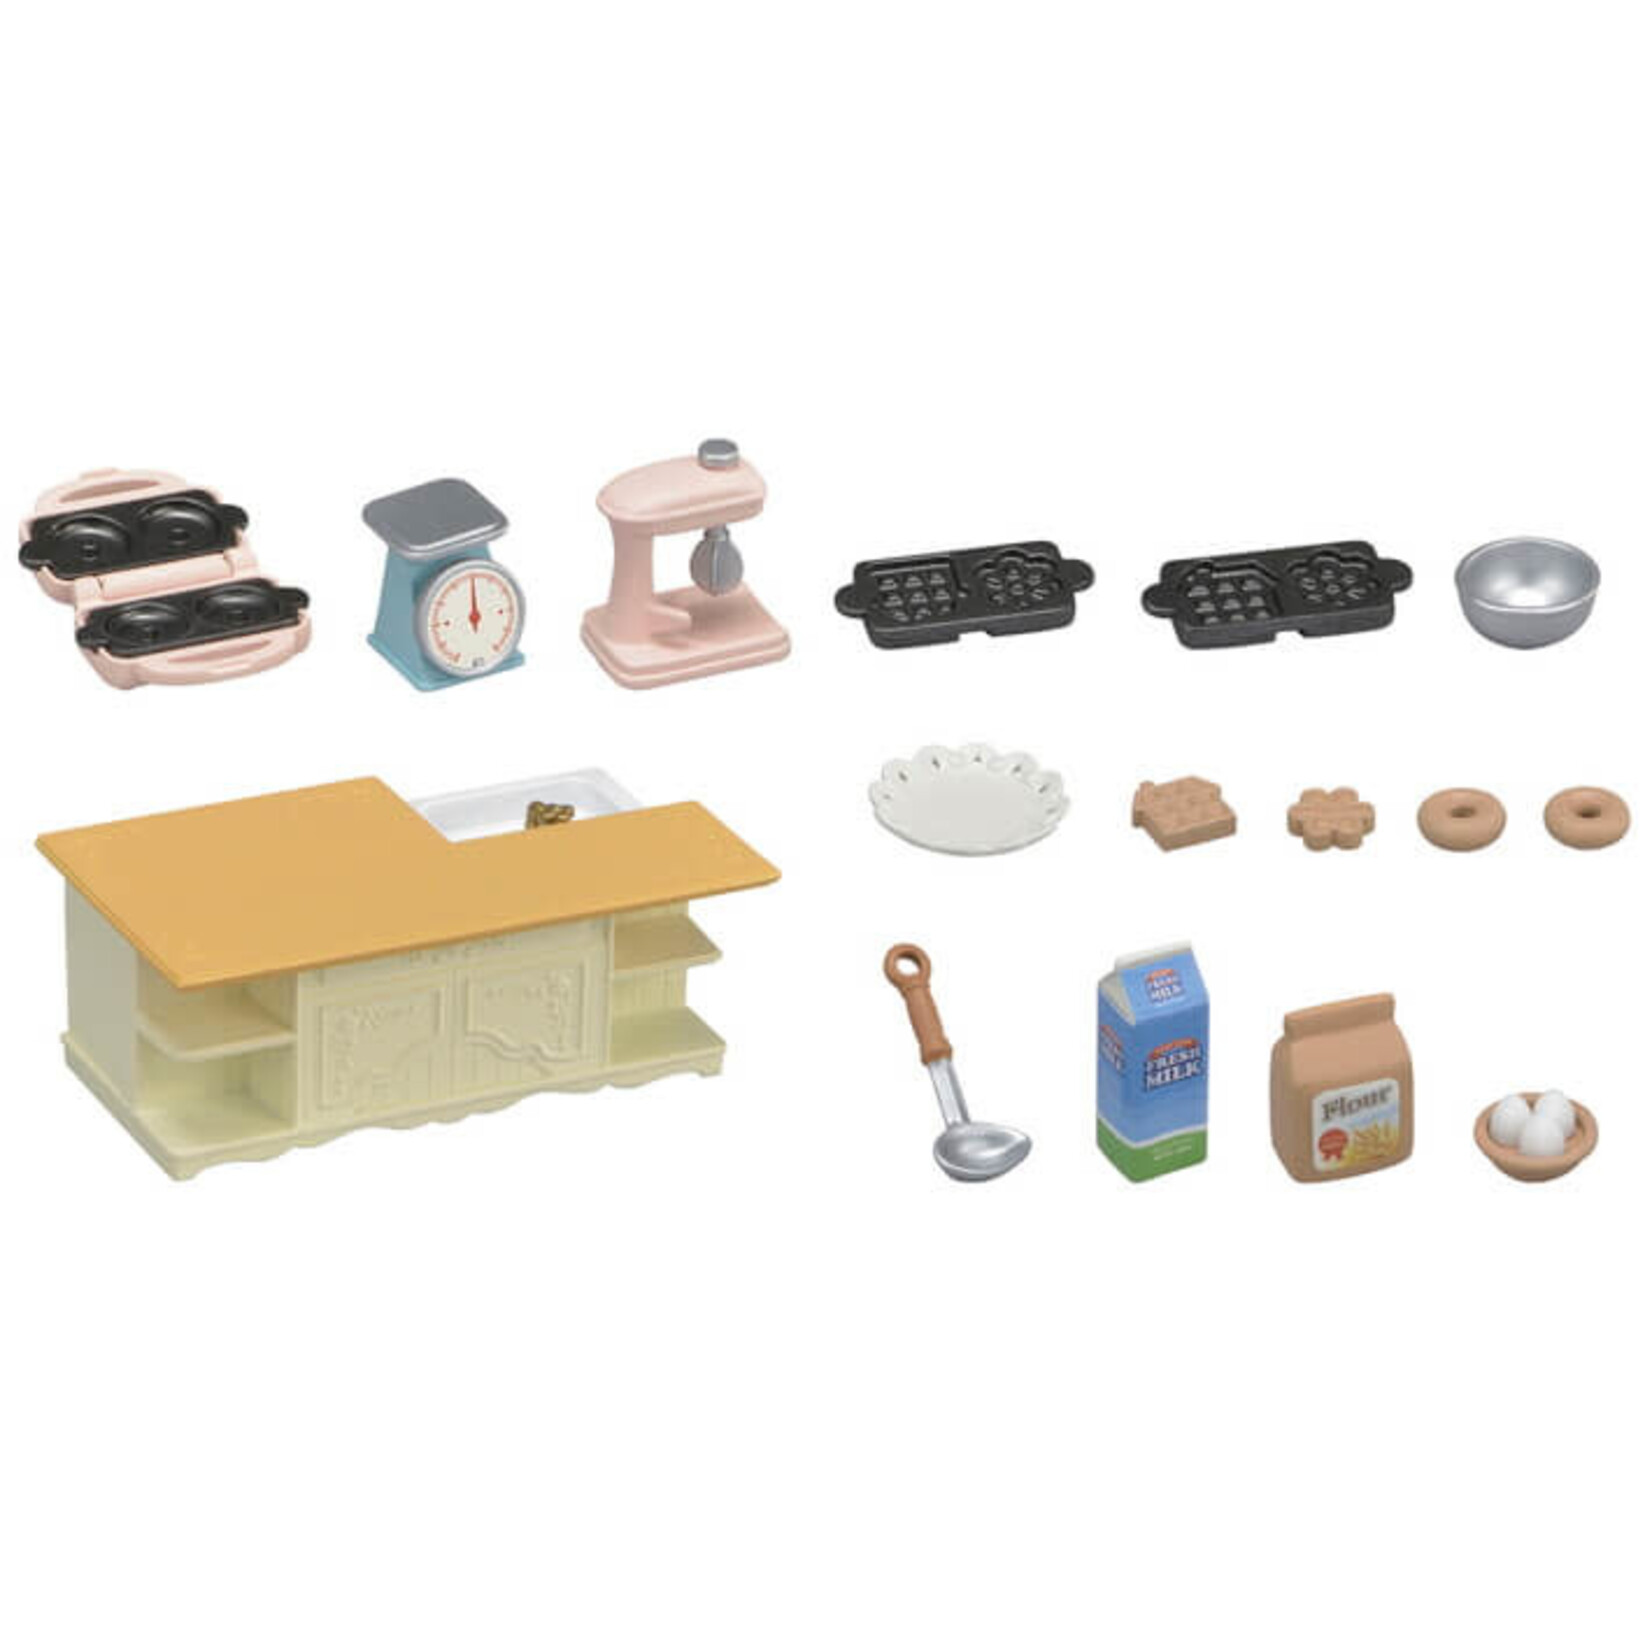 Calico Critters Calico Critters Kitchen Island